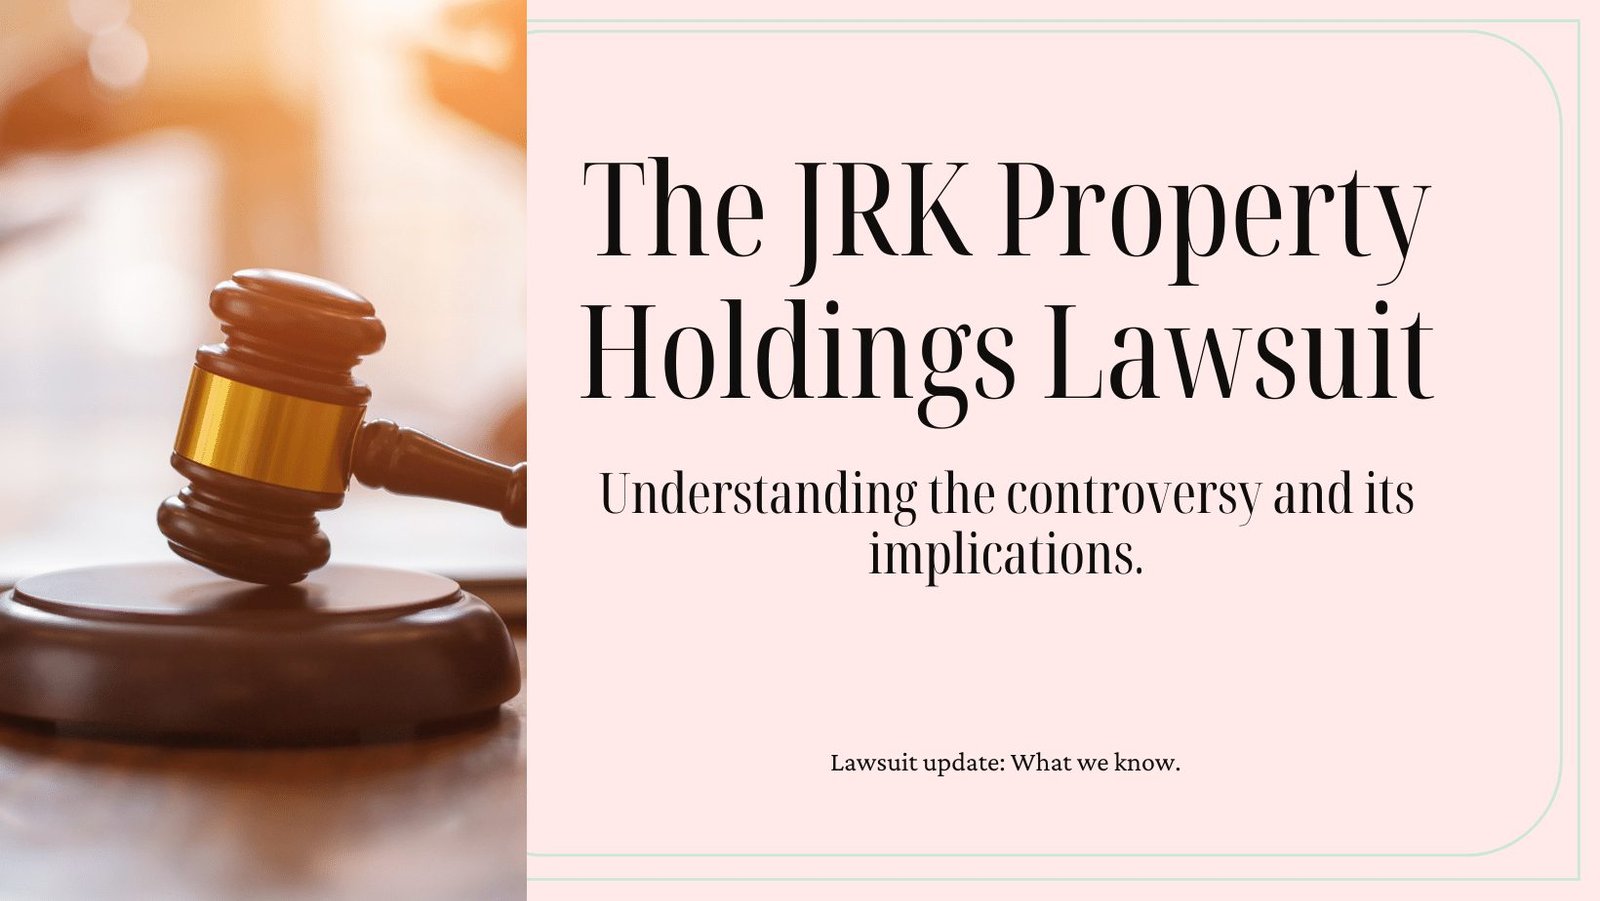 JRK Property Holdings Lawsuit A Deep Dive into the Legal Controversy